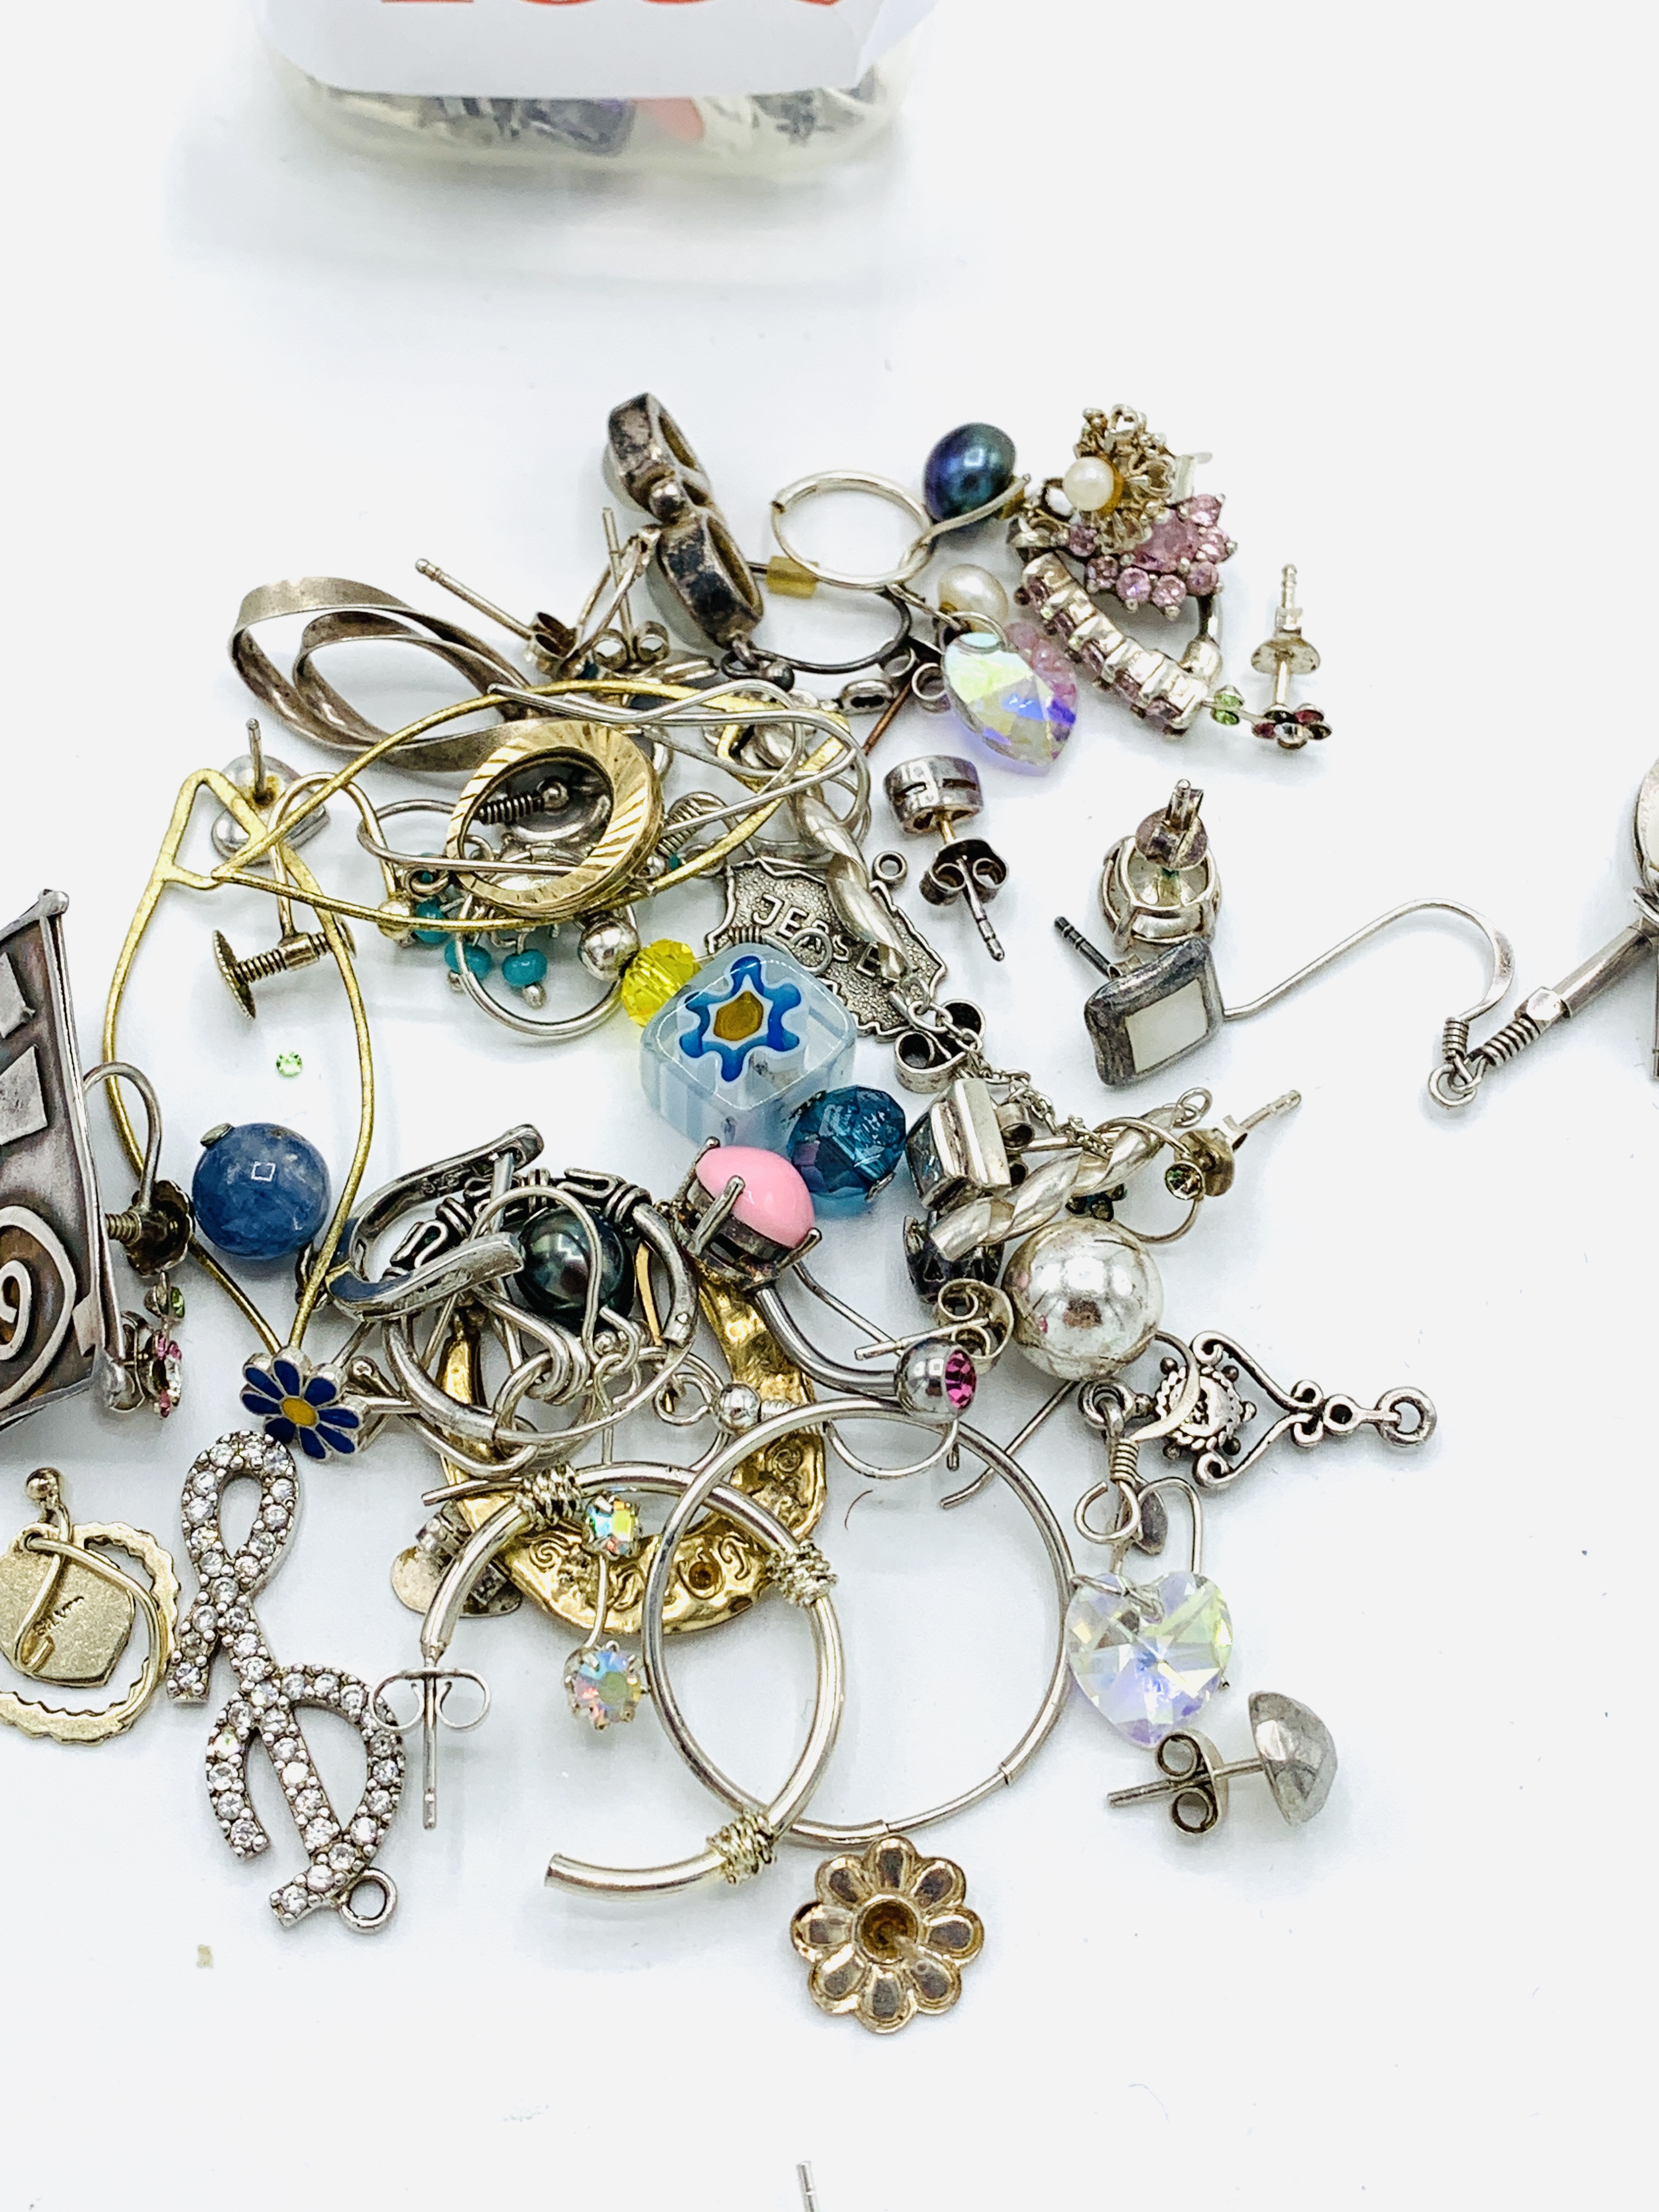 Quantity of 925 silver charms, pendants, and single earrings, some with stones